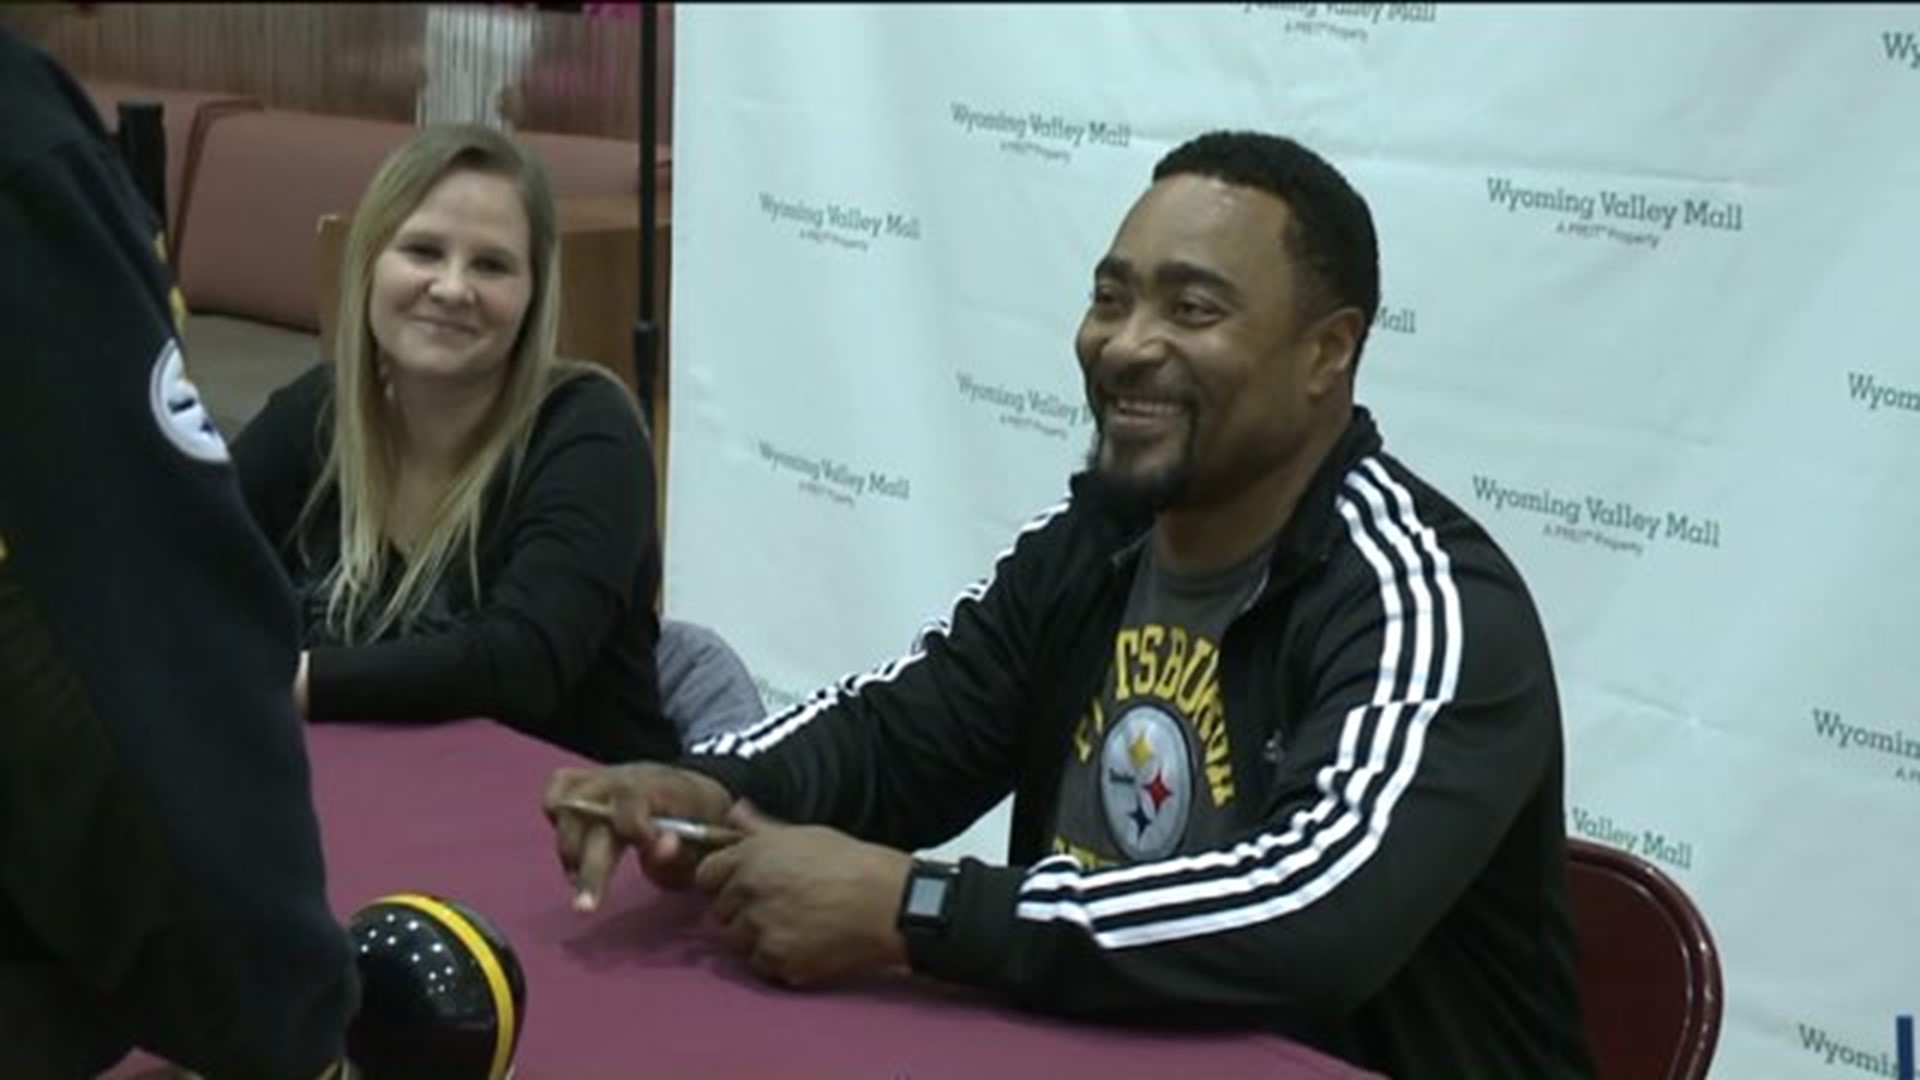 Former Pittsburgh Steeler Yancey Thigpen on Hand at Wyoming Valley Mall